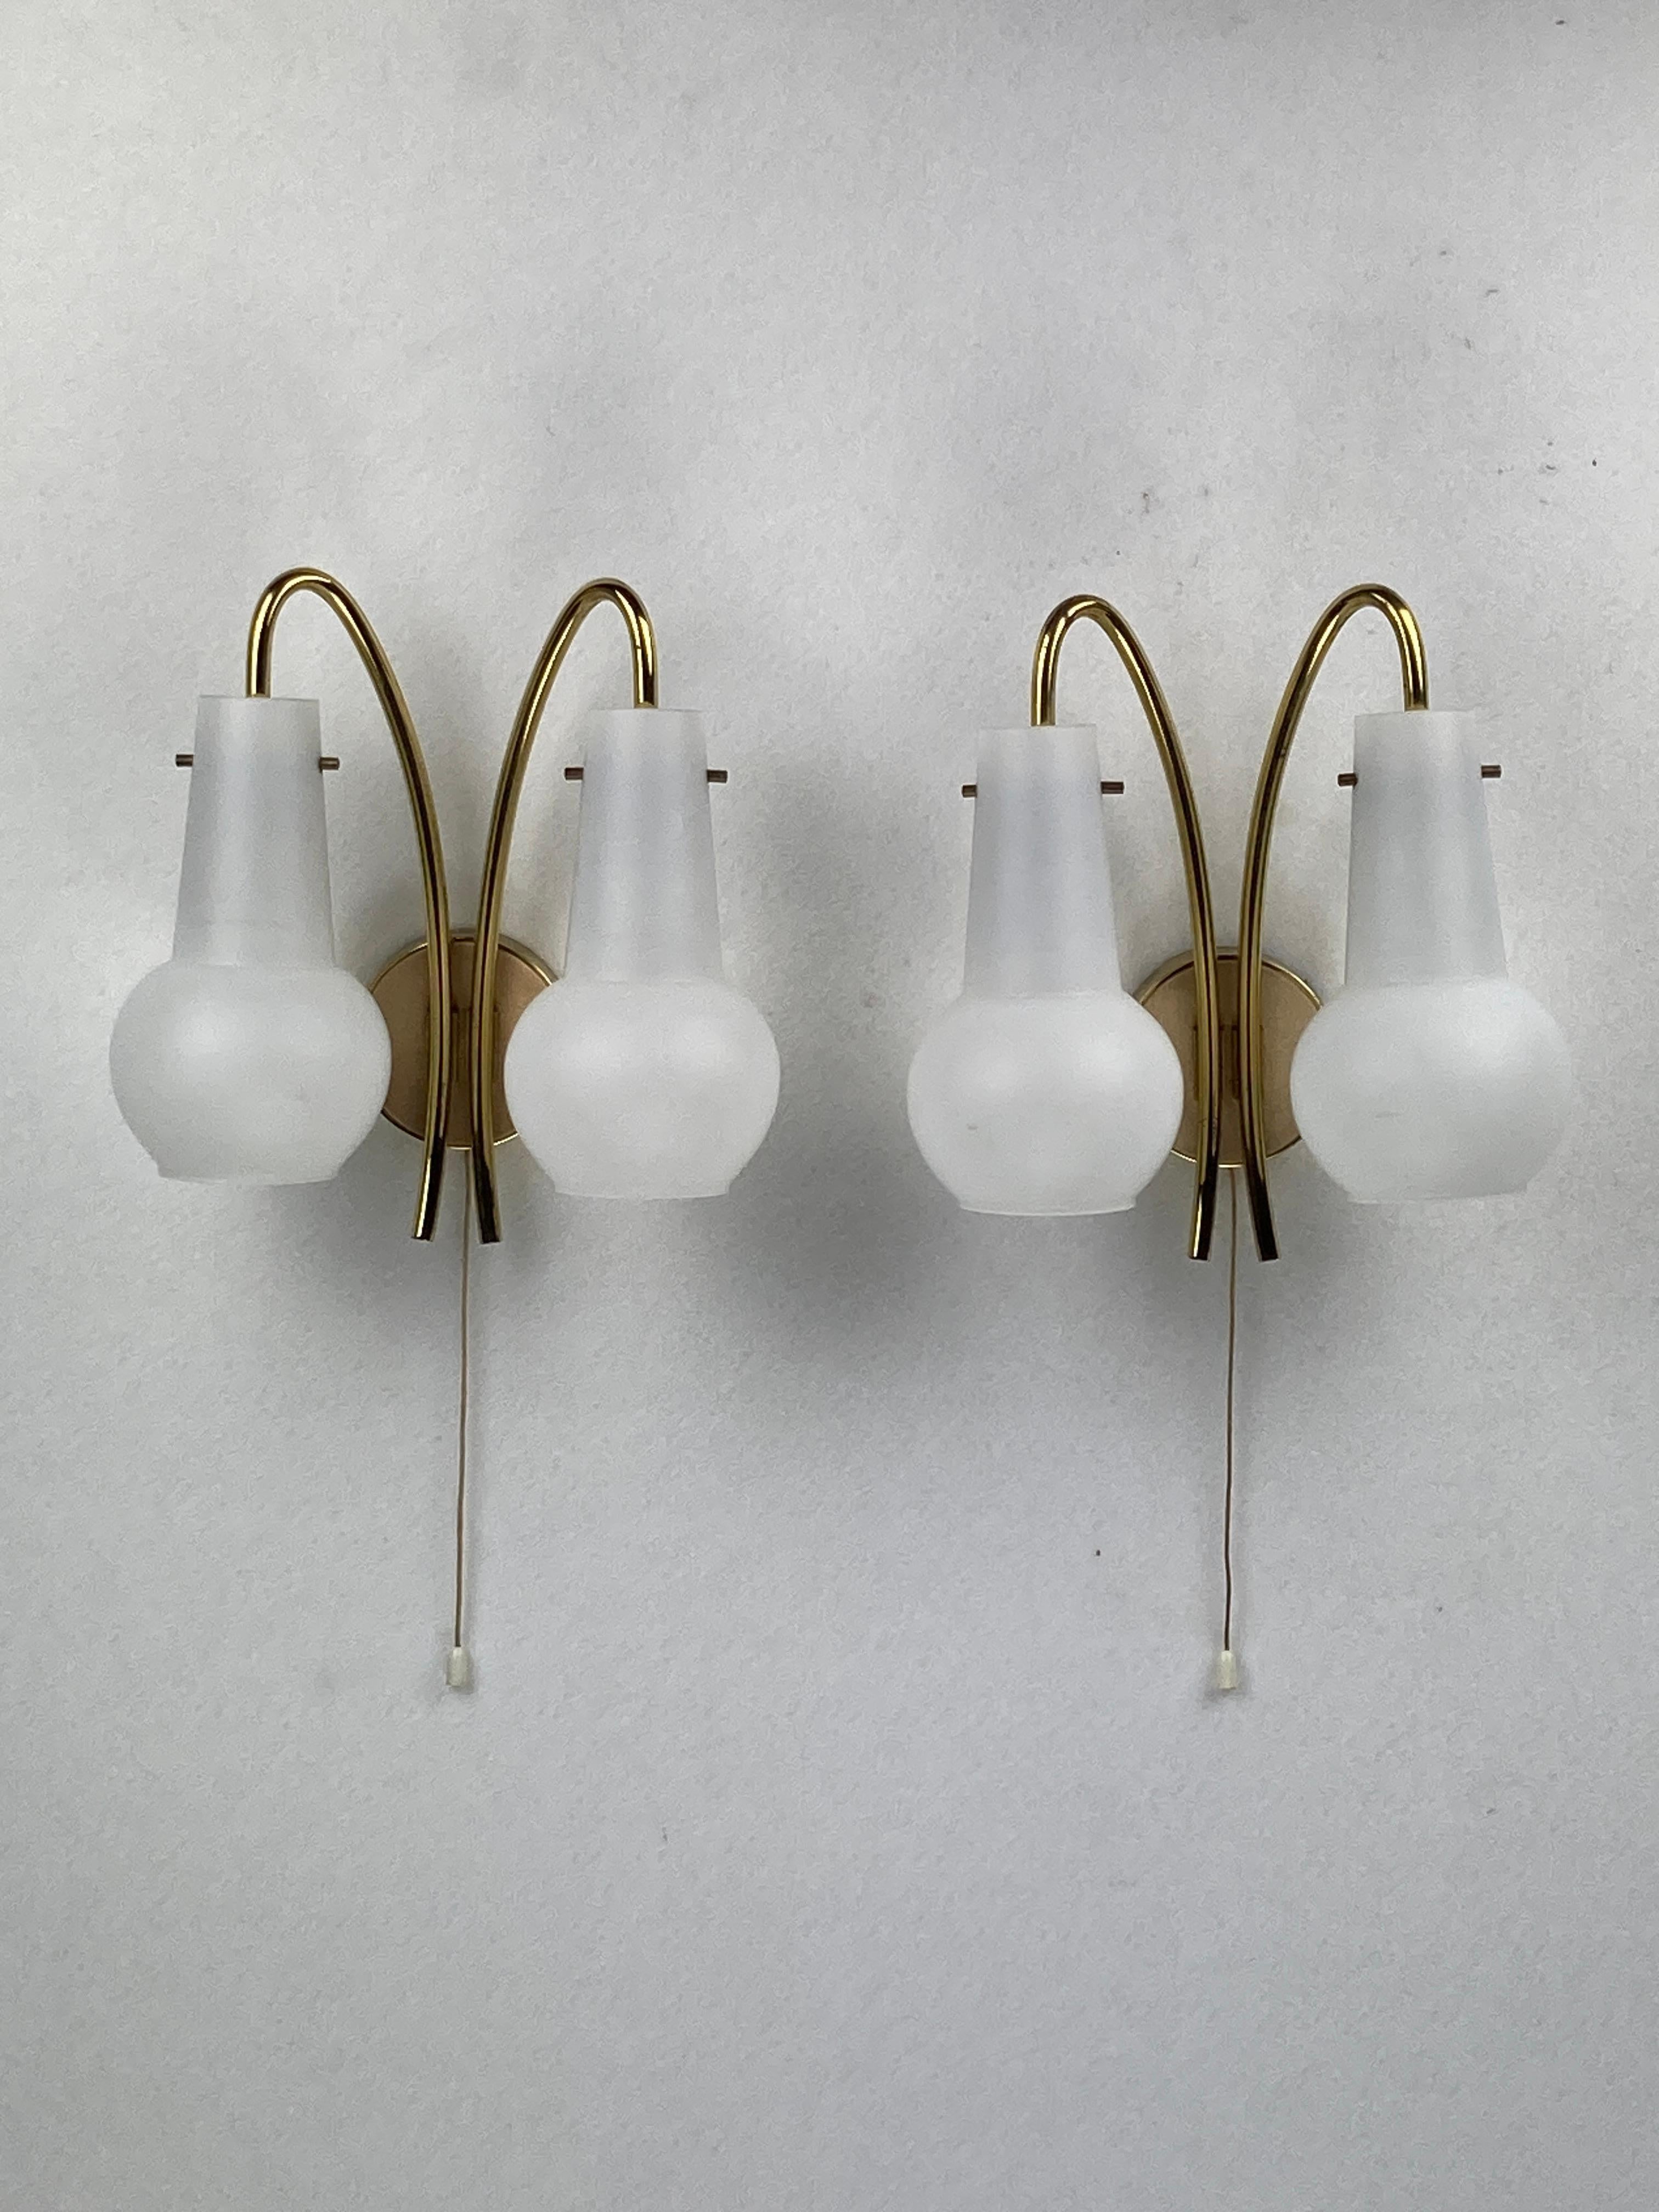 Gorgeous pair of brass and opaline wall sconces or bedside lamps, austria 1950s. This set is in a lovely patinated condition as can be seen from the pics. The elegant glass spheres are scratch free and only have 1 or 2 very minor darker spots. The